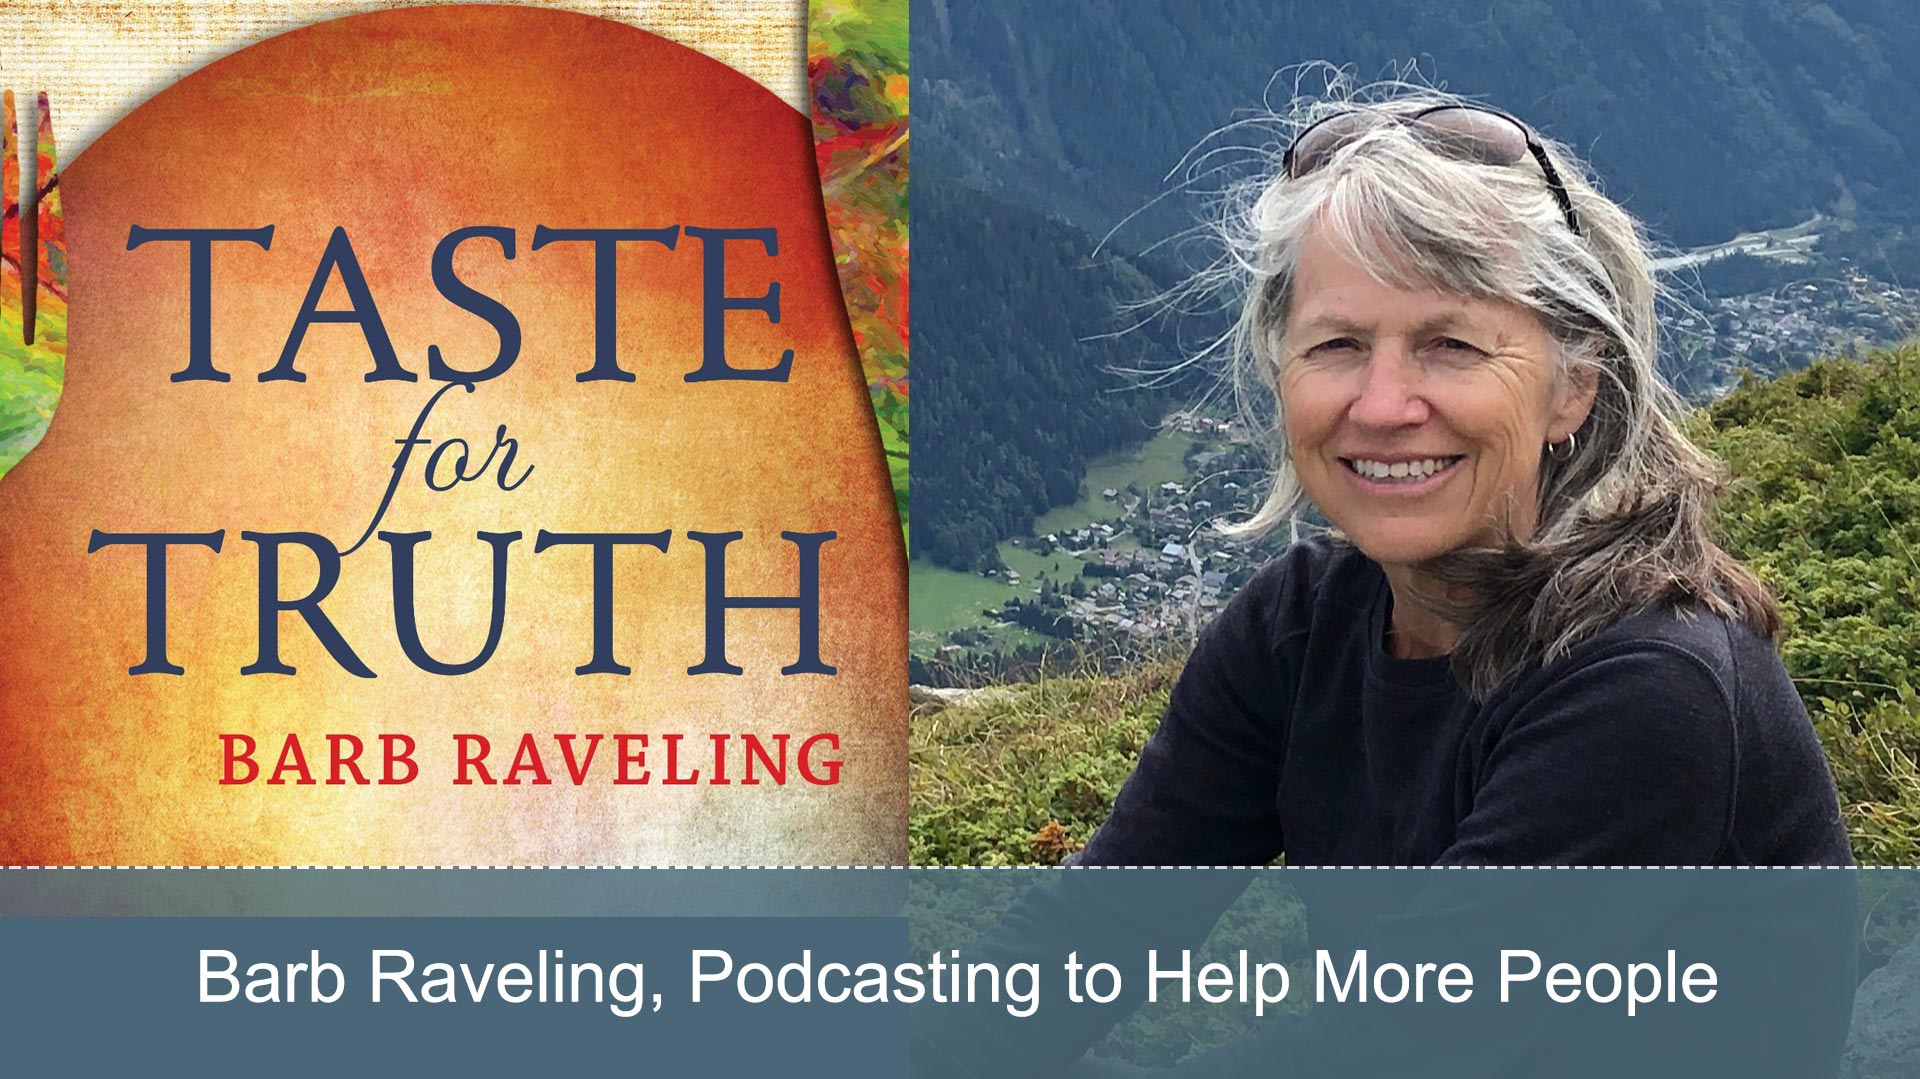 Podcasting: A Way to Help People – Interview with Barb Raveling